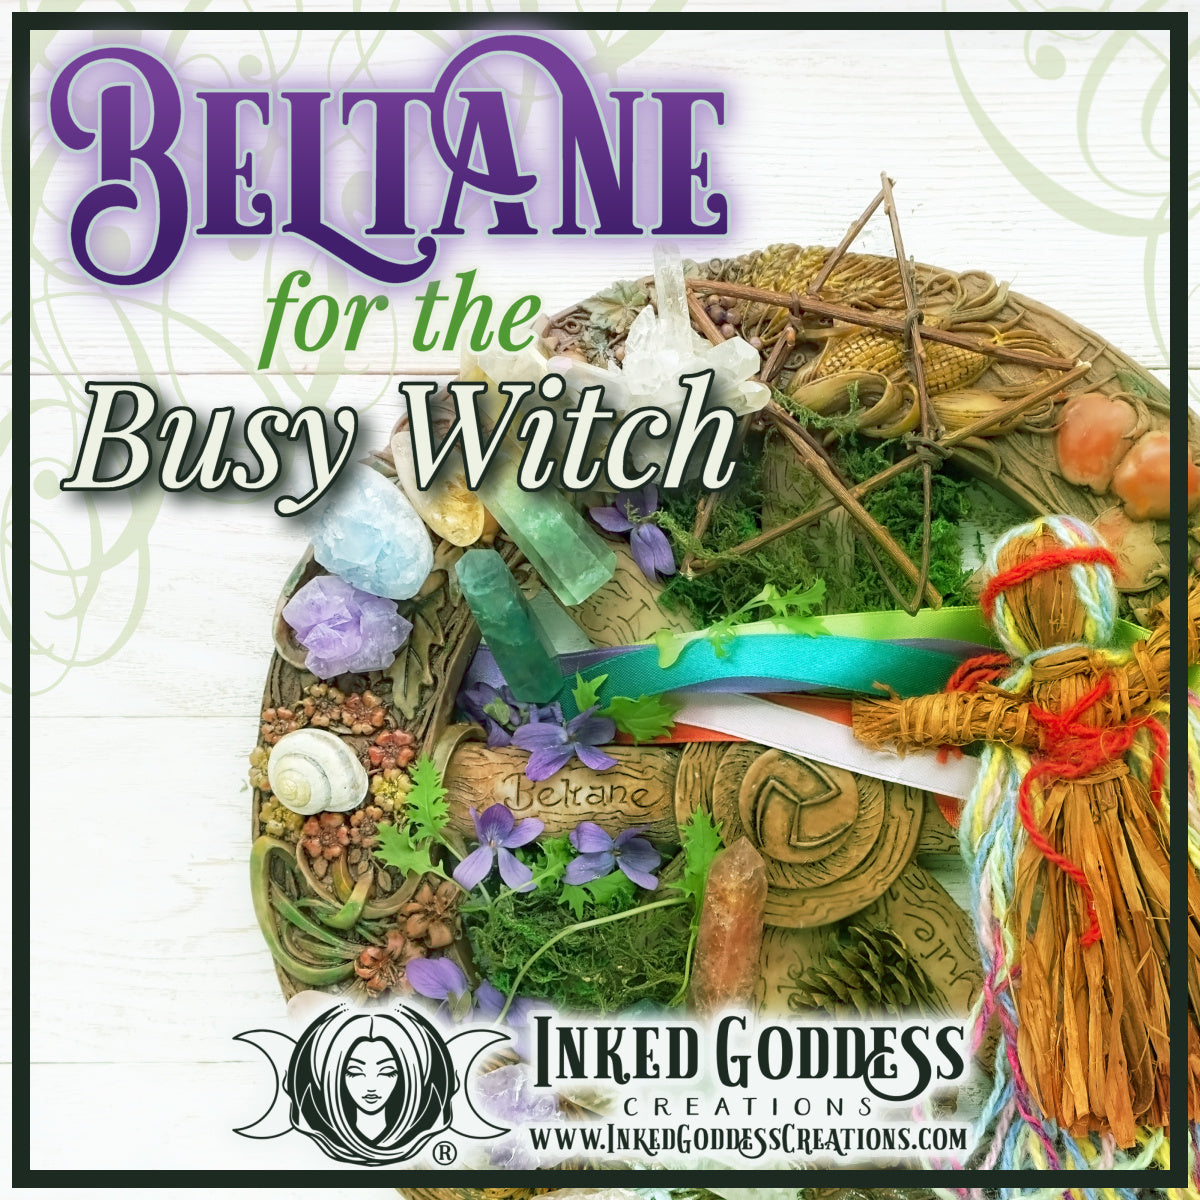 Beltane for the Busy Witch- Inked Goddess Creations